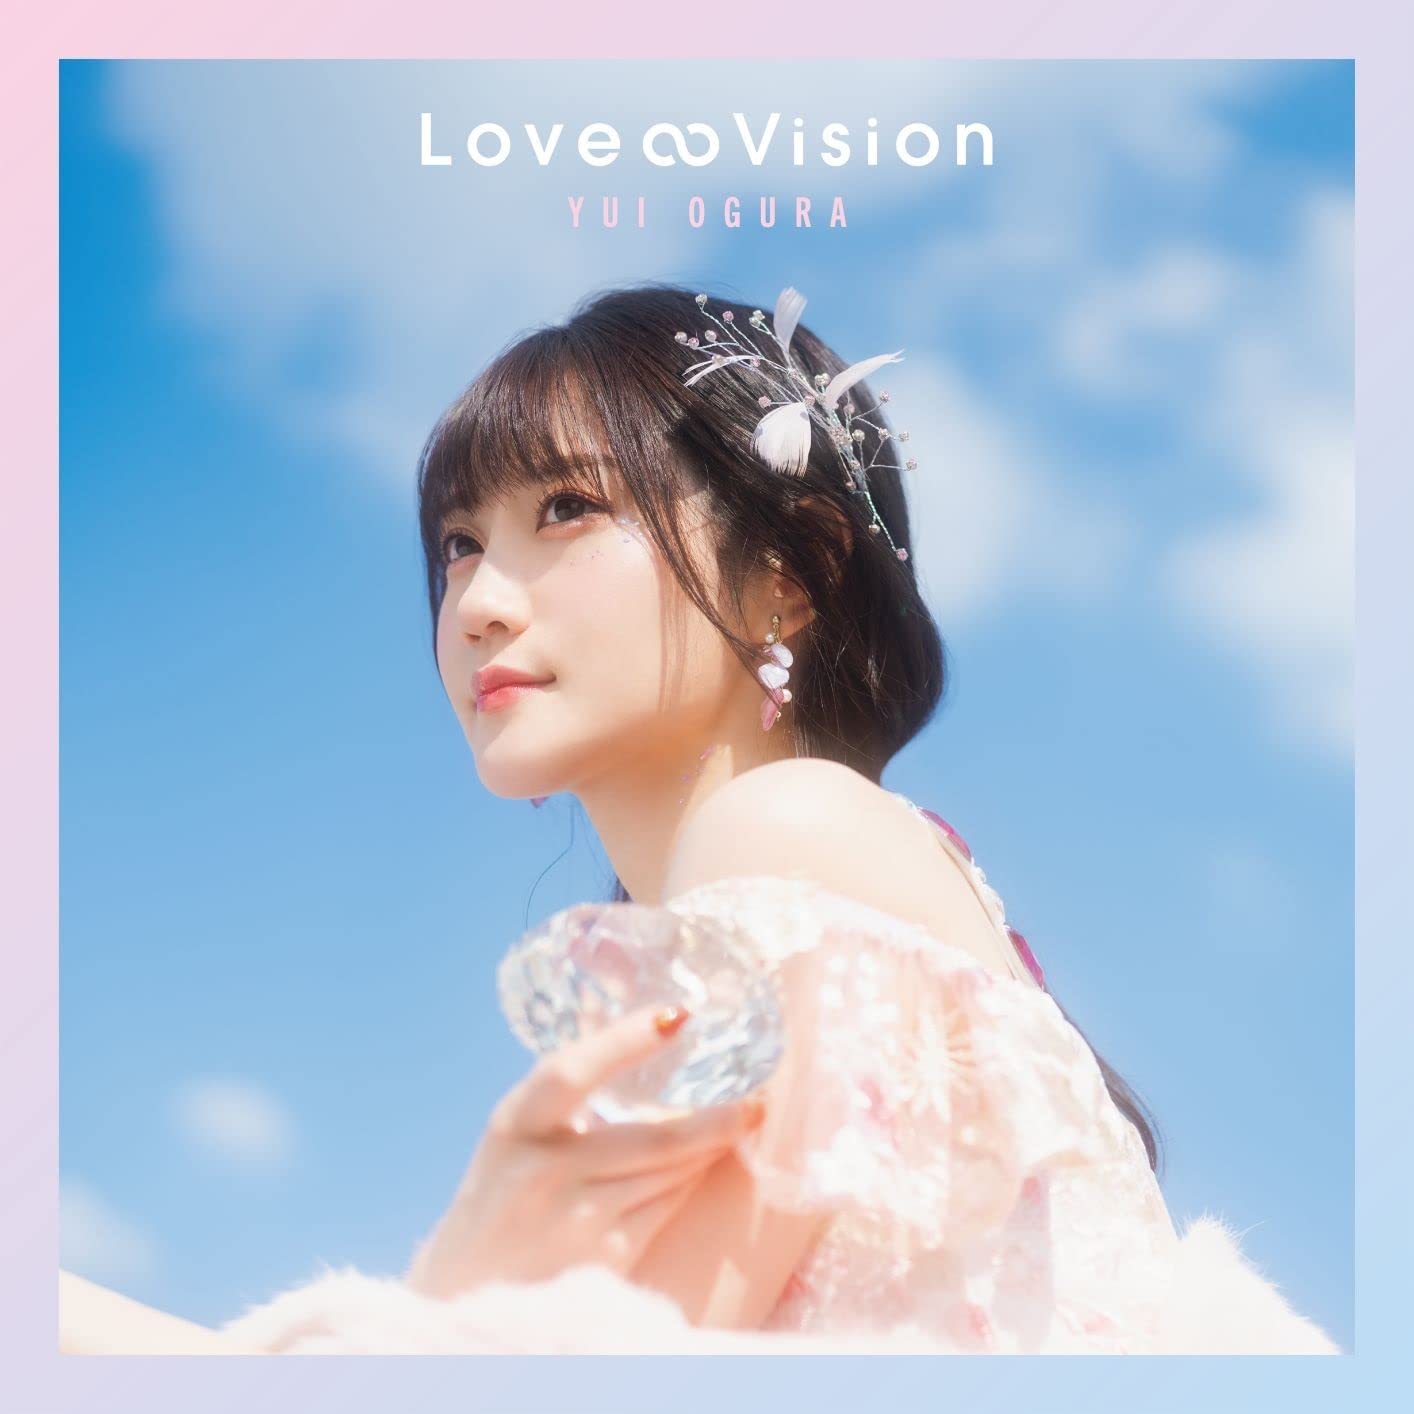 Cover art for『Yui Ogura - Precious.』from the release『Love∞Vision』